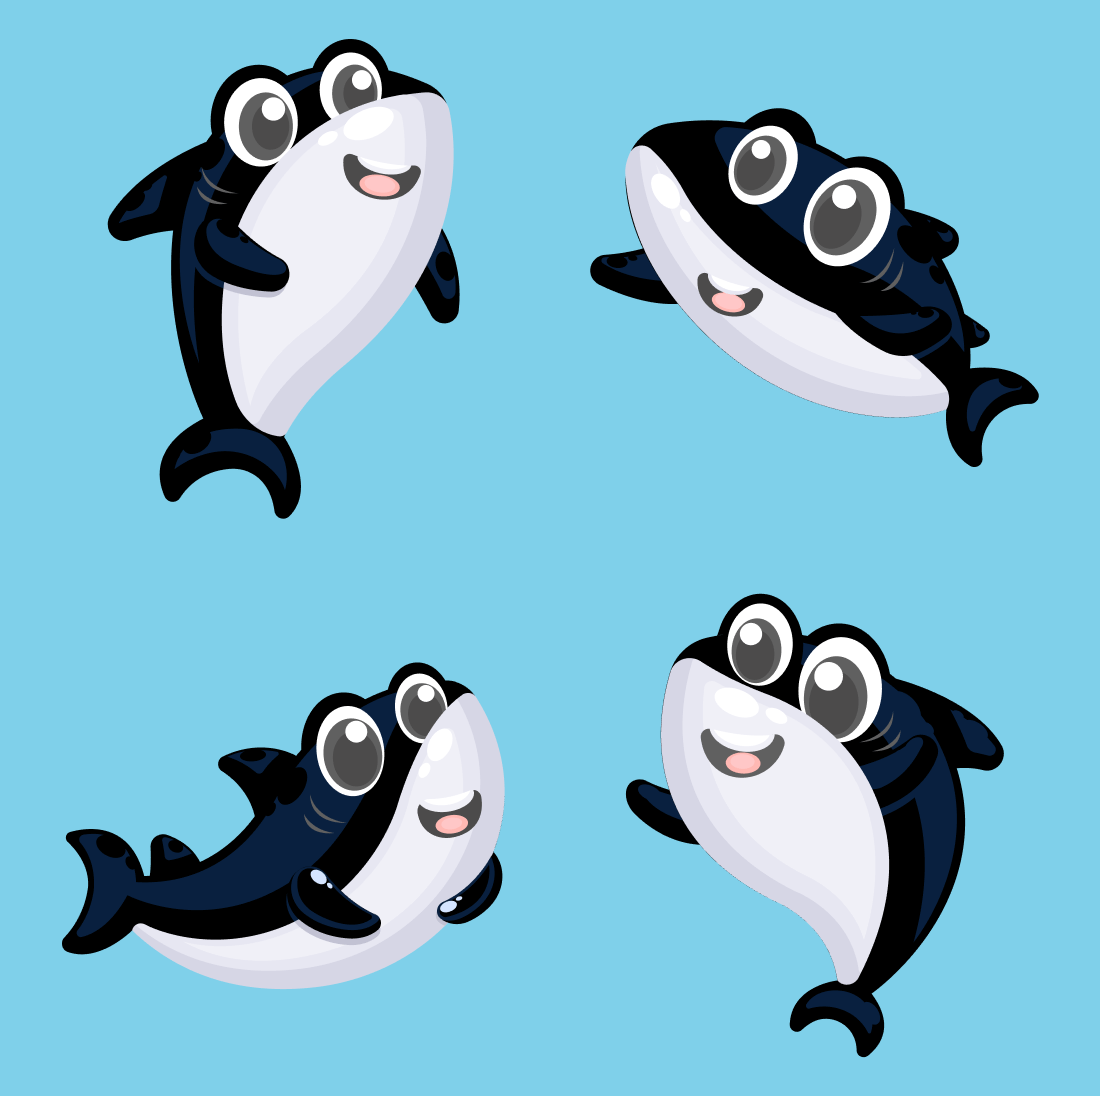 Group of cartoon black and white fish.